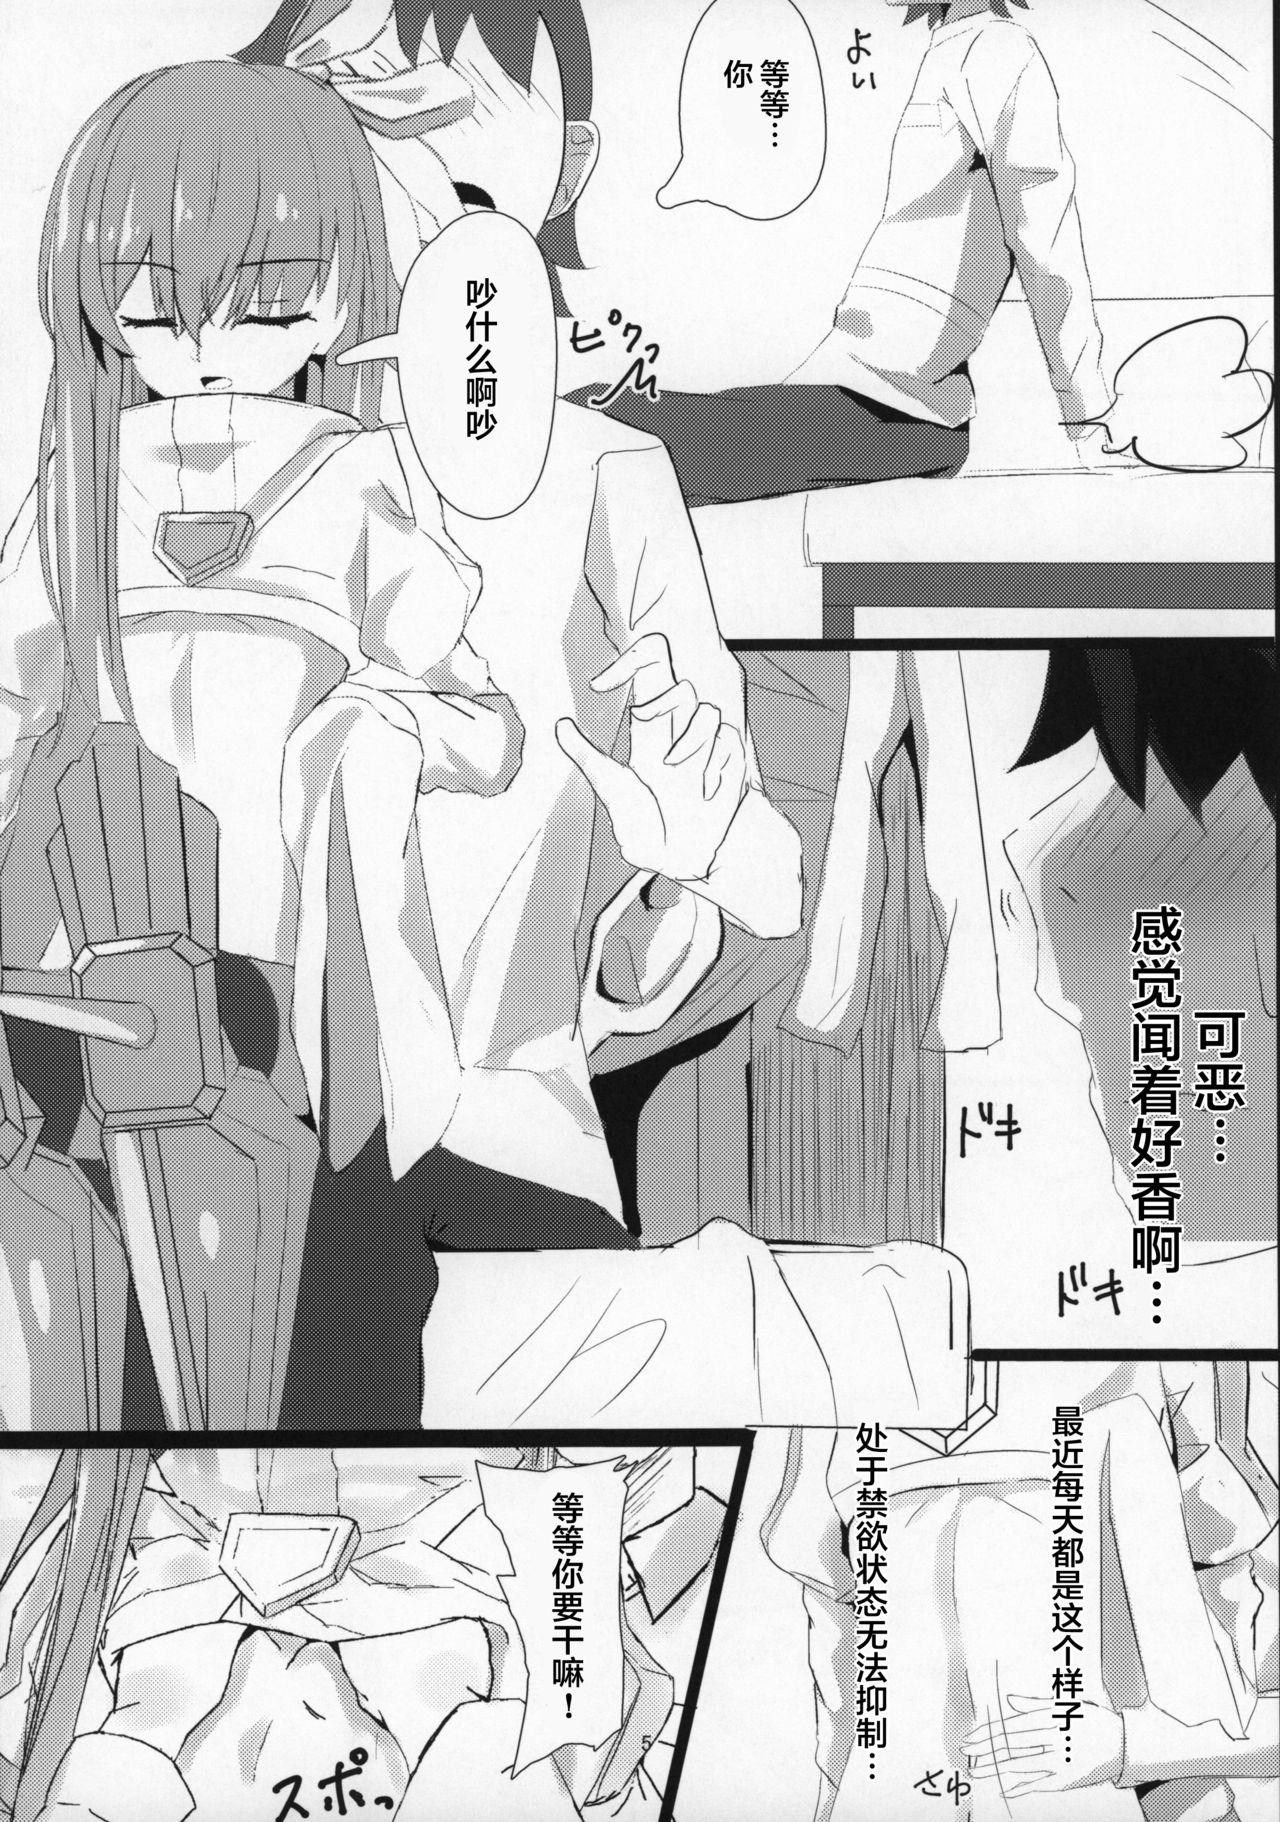 Insertion Melt down - Fate grand order Stepbrother - Page 5